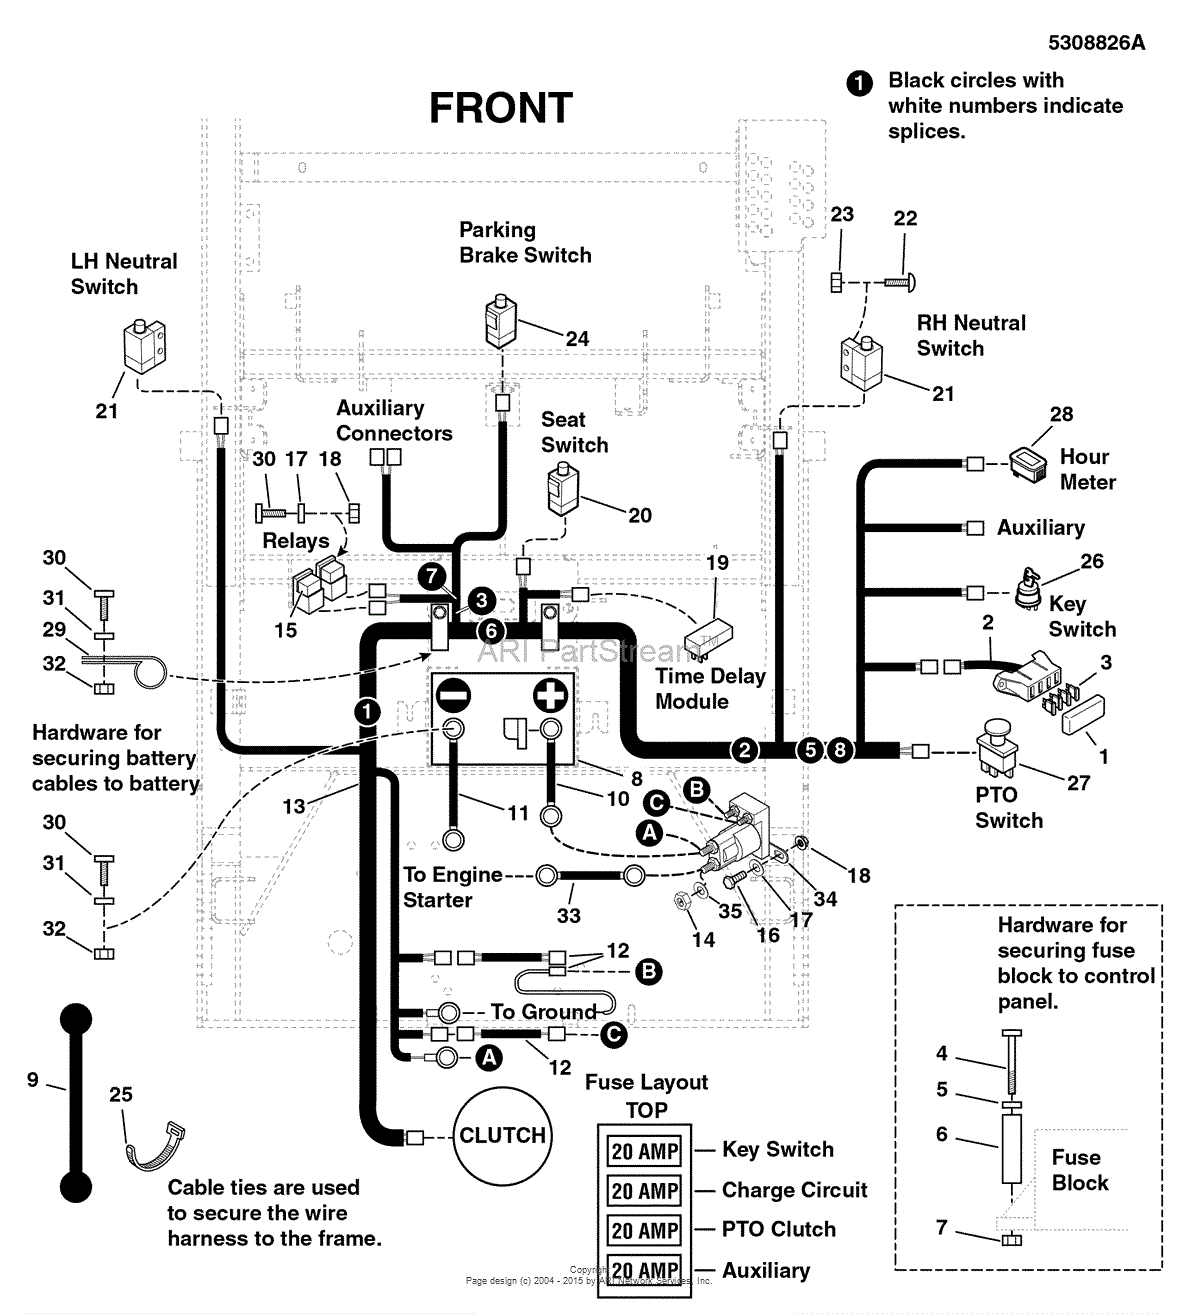 Murray Lawn Mower Ignition Switch Wiring Diagram from az417944.vo.msecnd.net